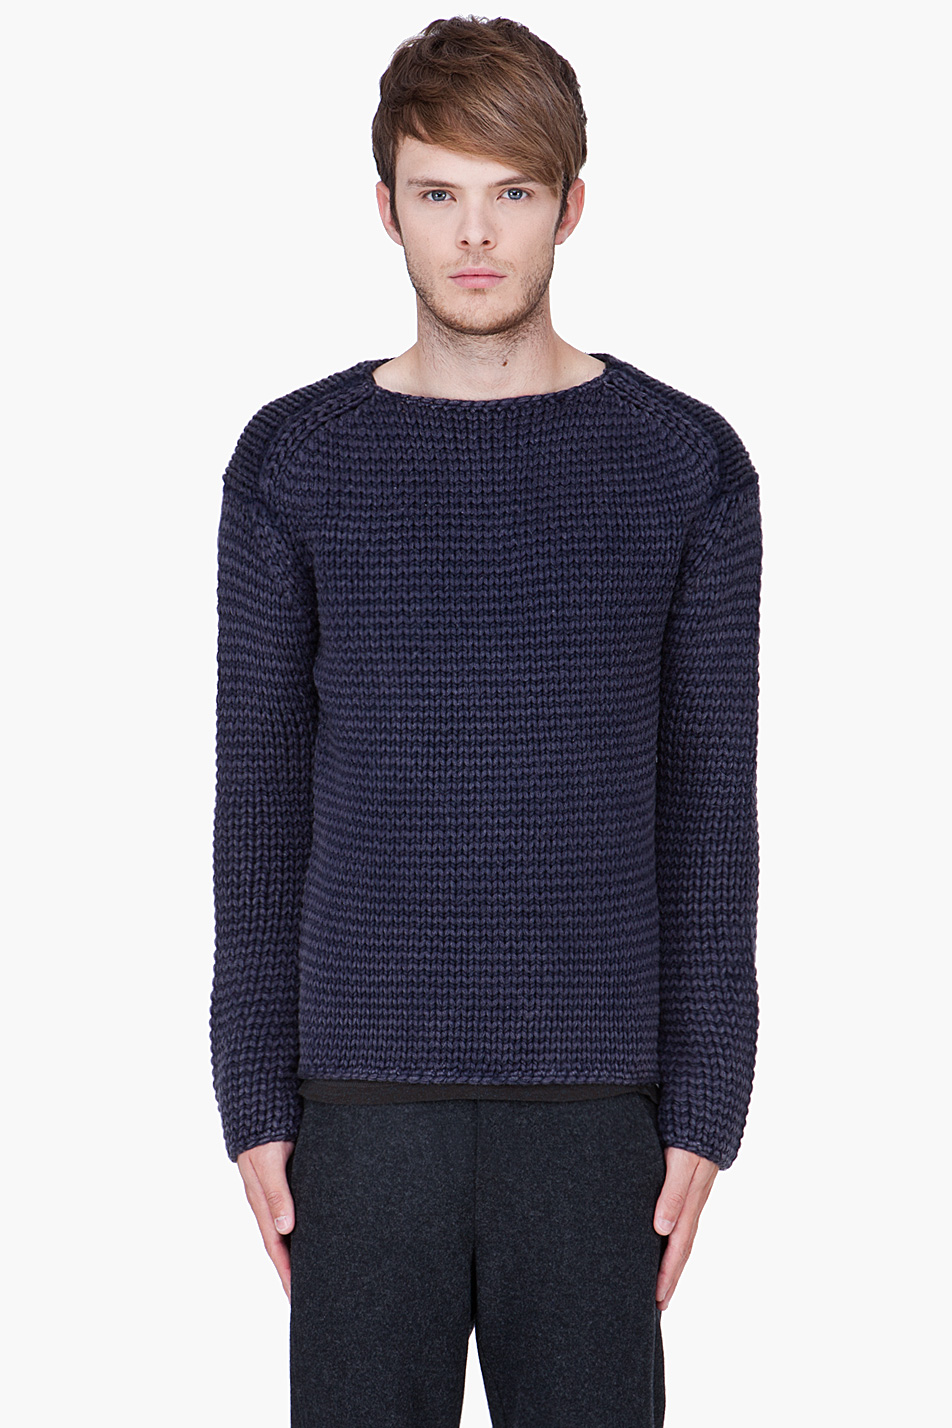 T by alexander wang Indigo Acid Washed Knit Sweater in Blue for Men | Lyst